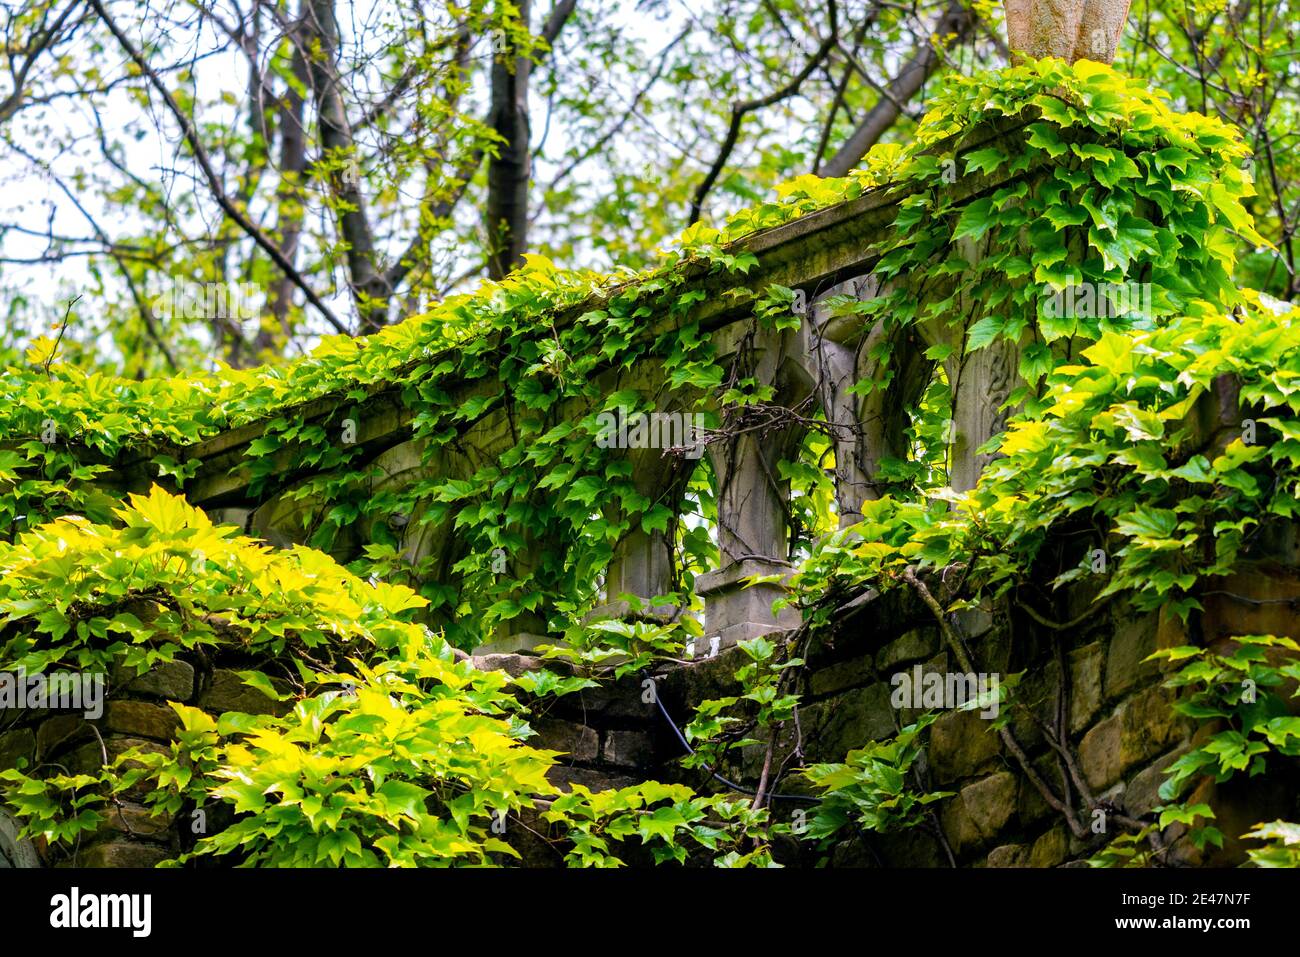 English Ivy or Hedera Helix is a clinging evergreen vine plant. Stock Photo